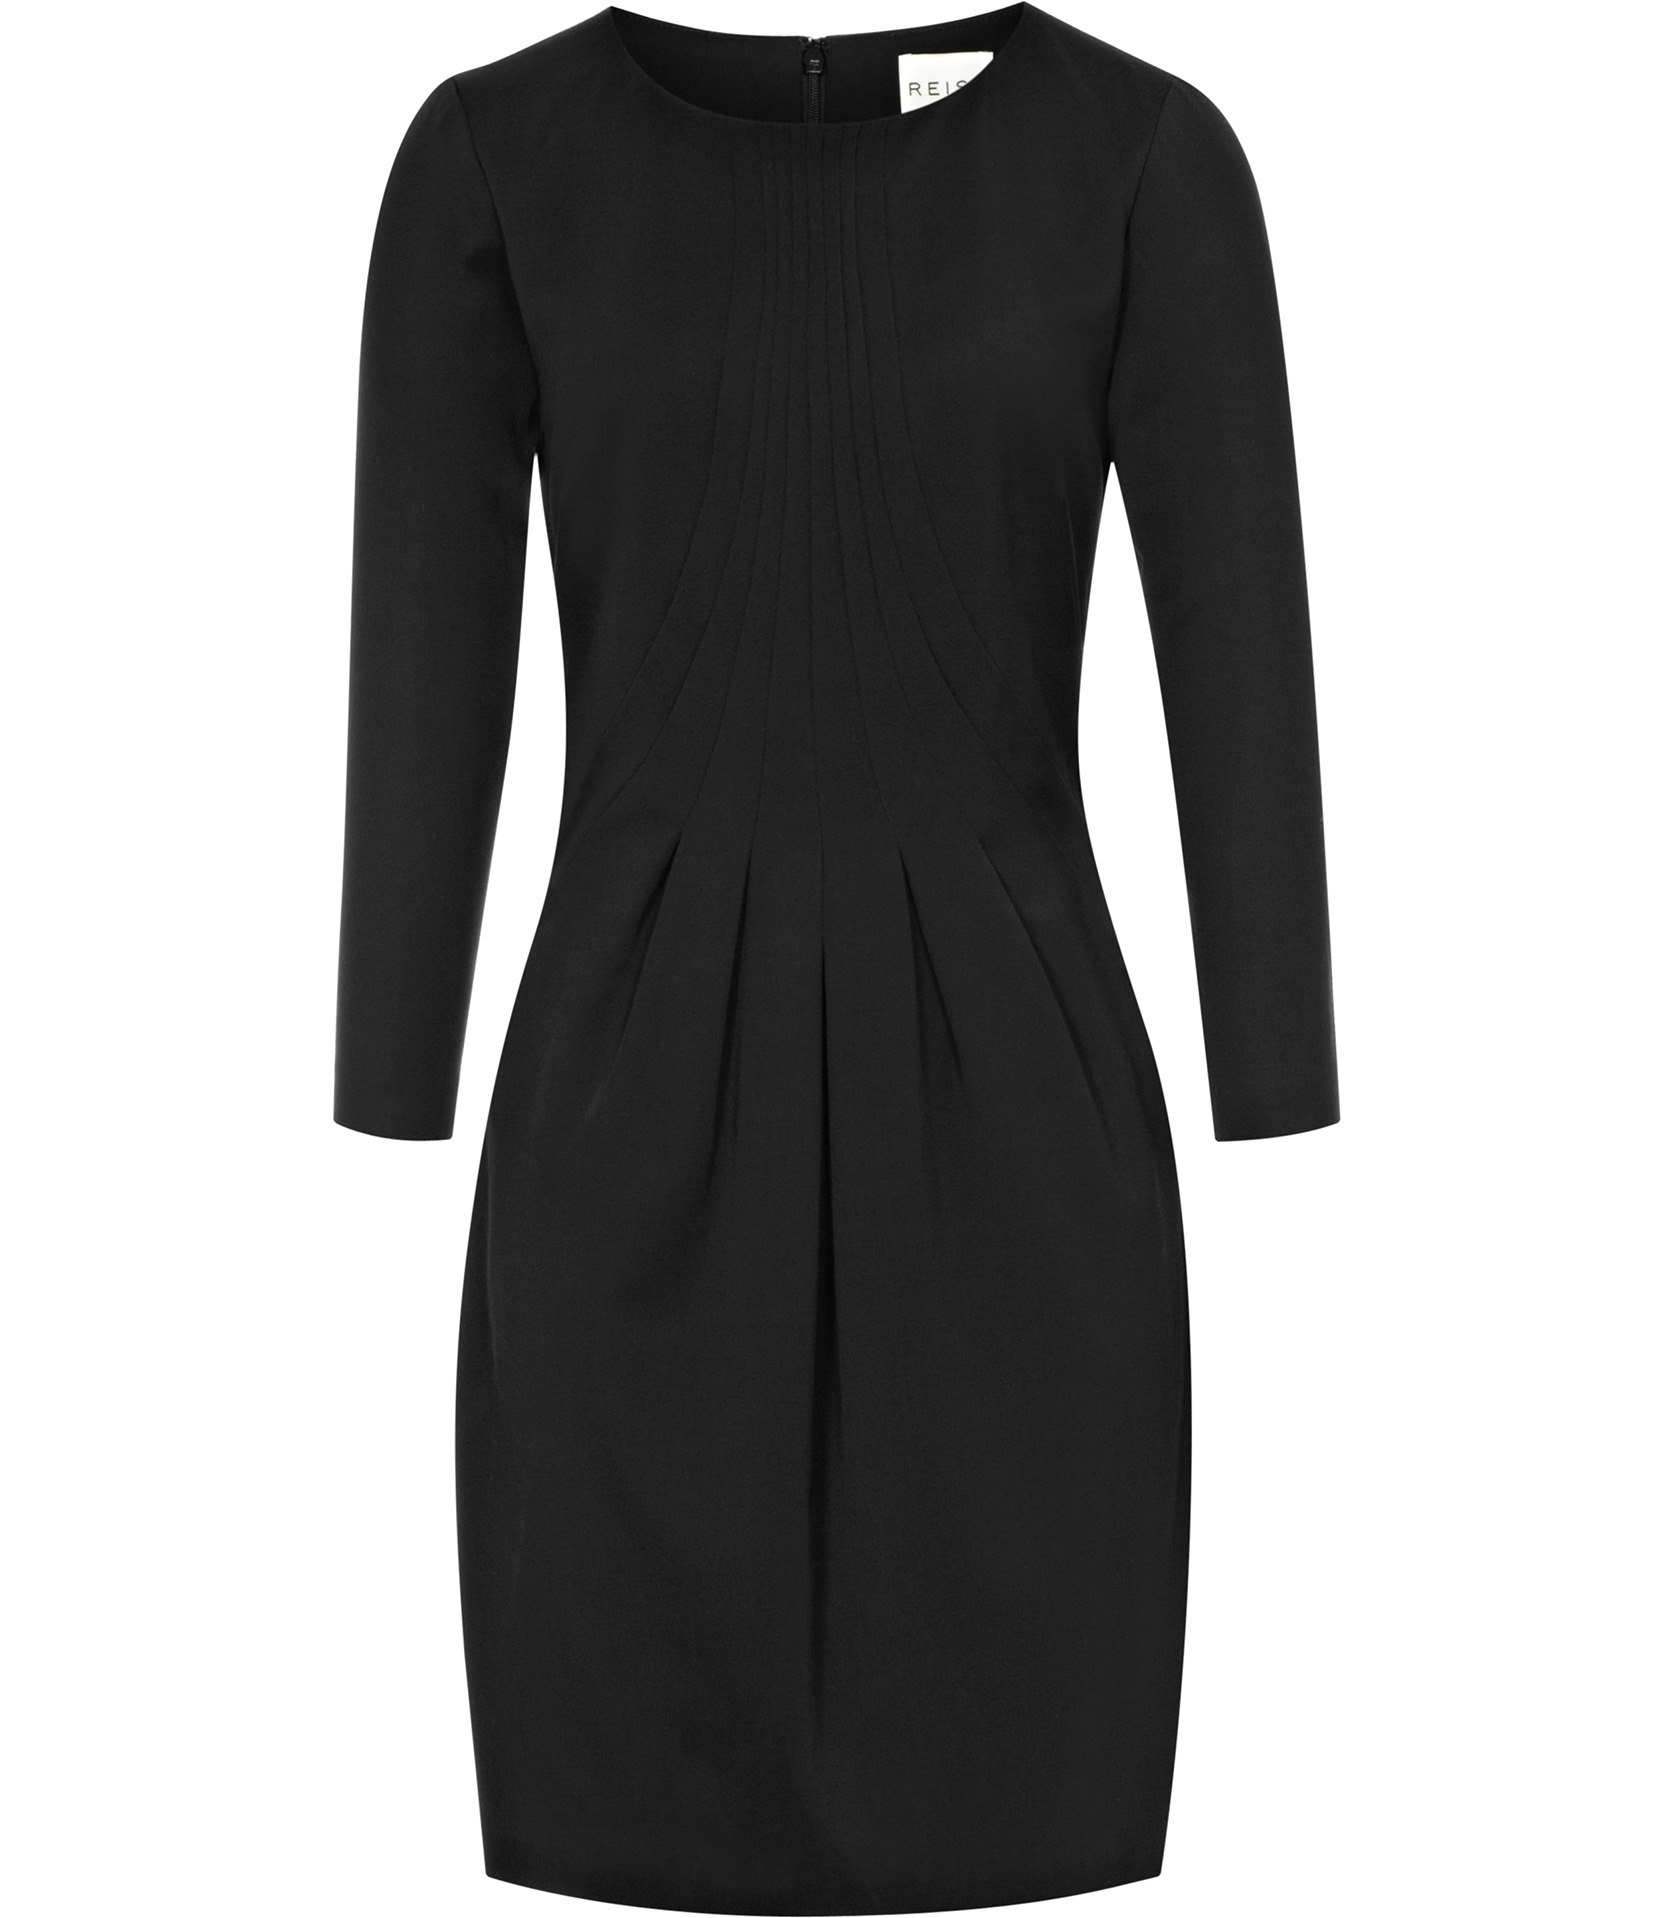 Lyst - Reiss Ambrose Curved Seam Shift Dress in Black